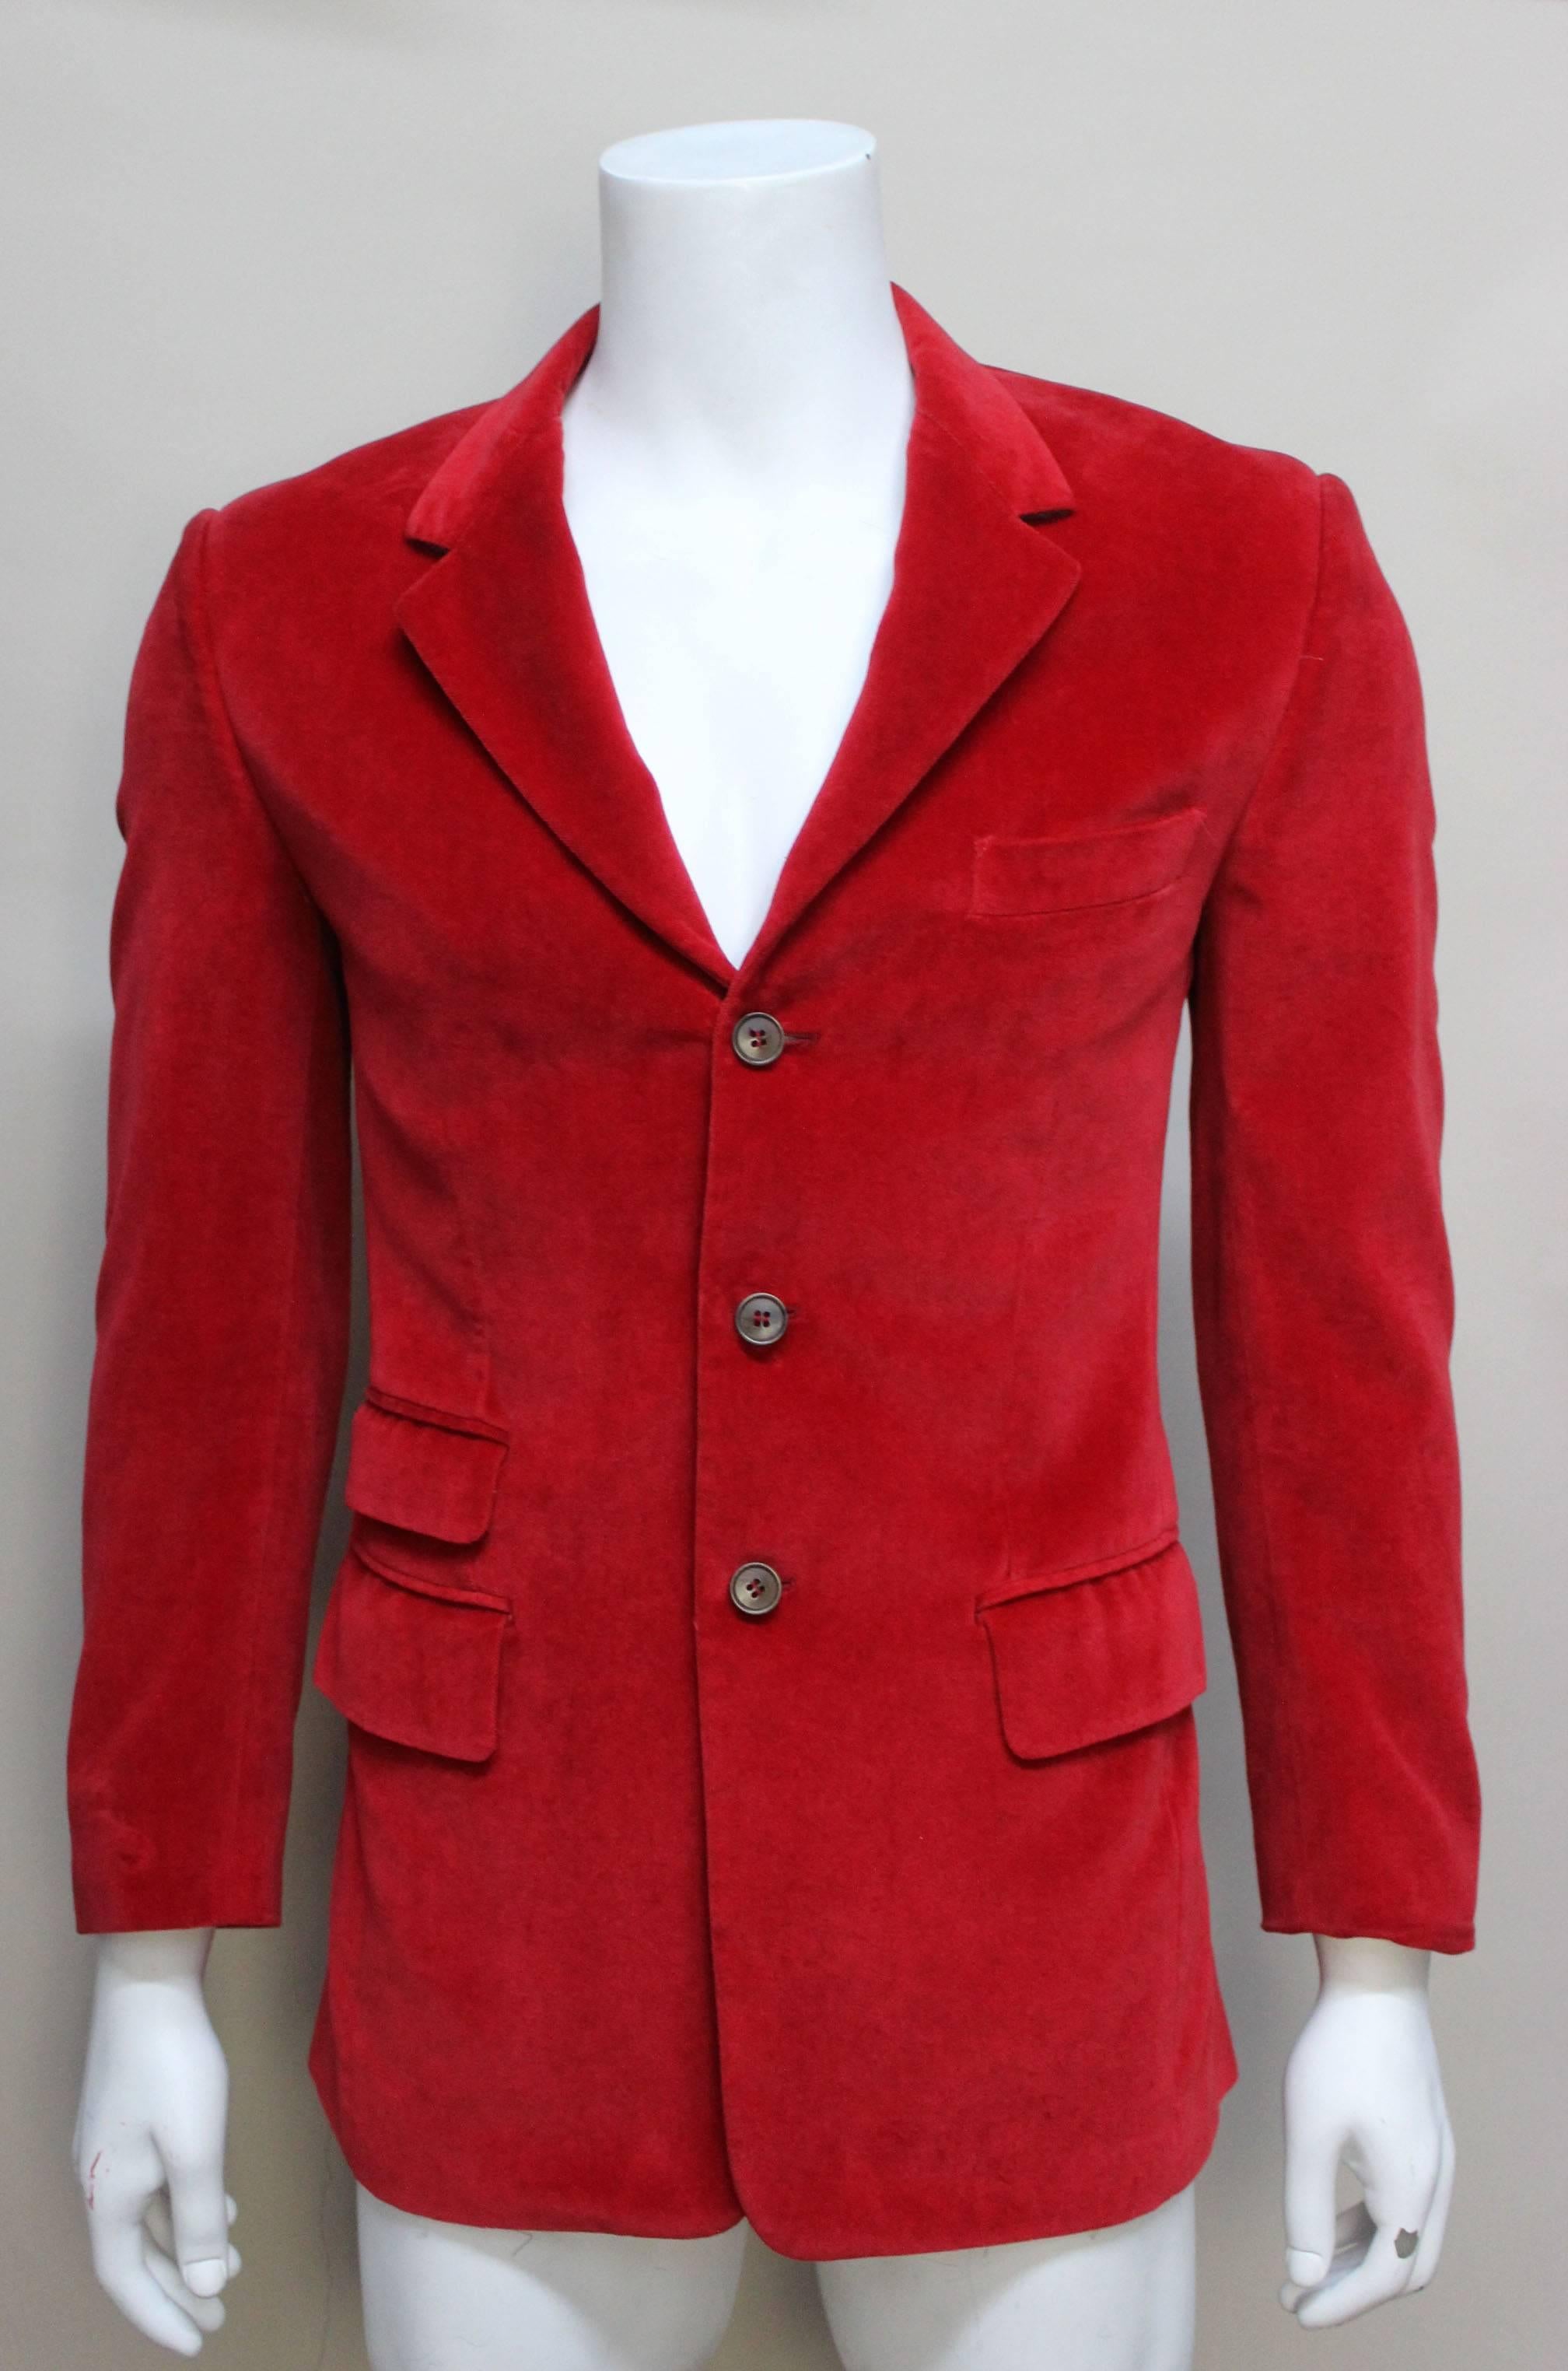 This classic three button jacket is perfect for the holiday season. The cut is a slim fit, has two back vents and three front pockets with flaps and a breast pocket. The rich red color and luxe velvet fabric makes this a perfect formal addition to